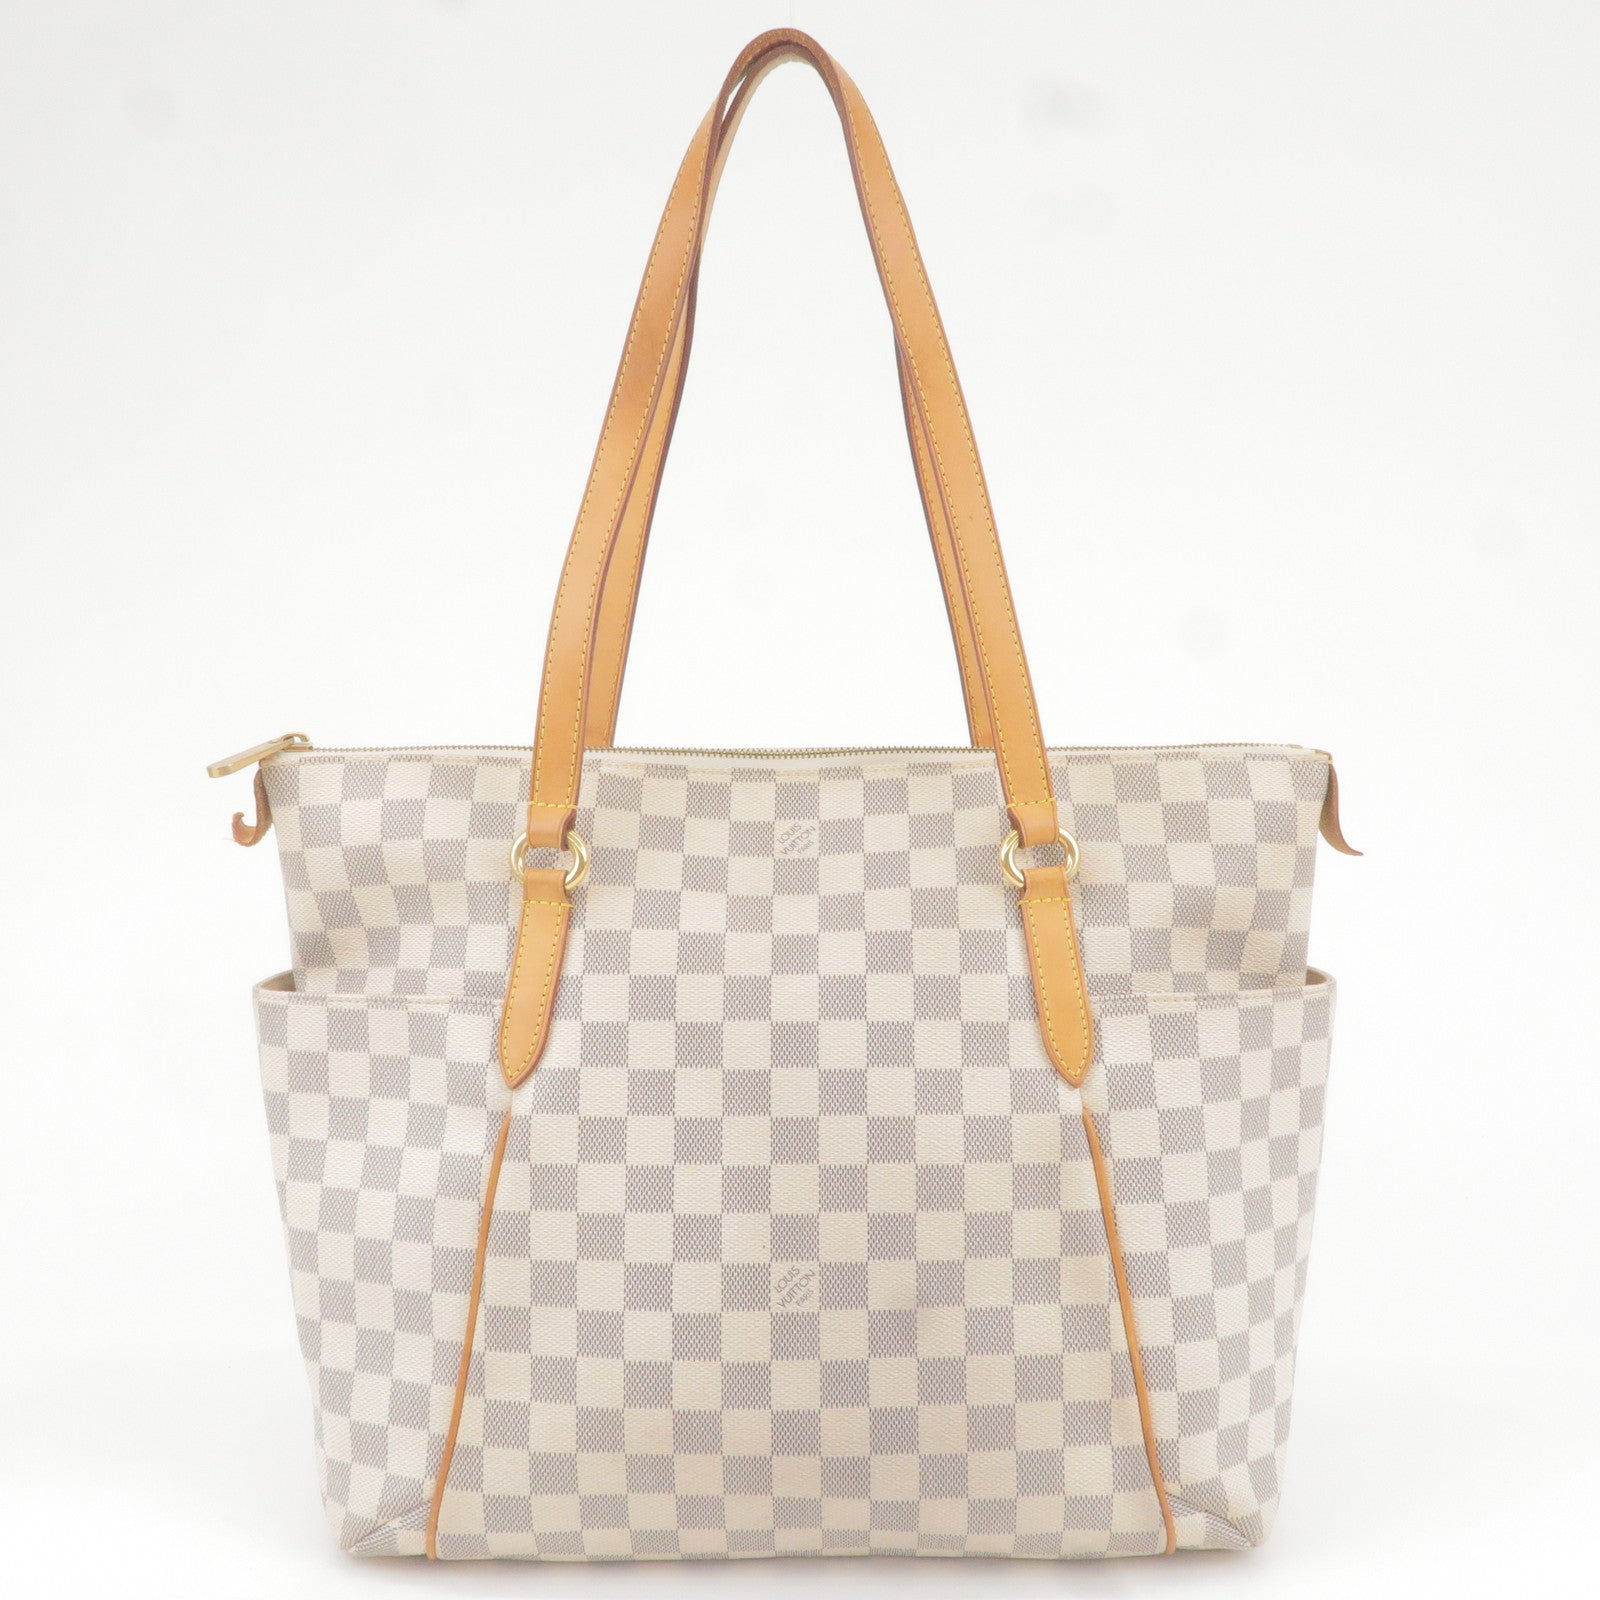 Vuitton - Hand - N51262 – dct - ep_vintage luxury Store - Bag